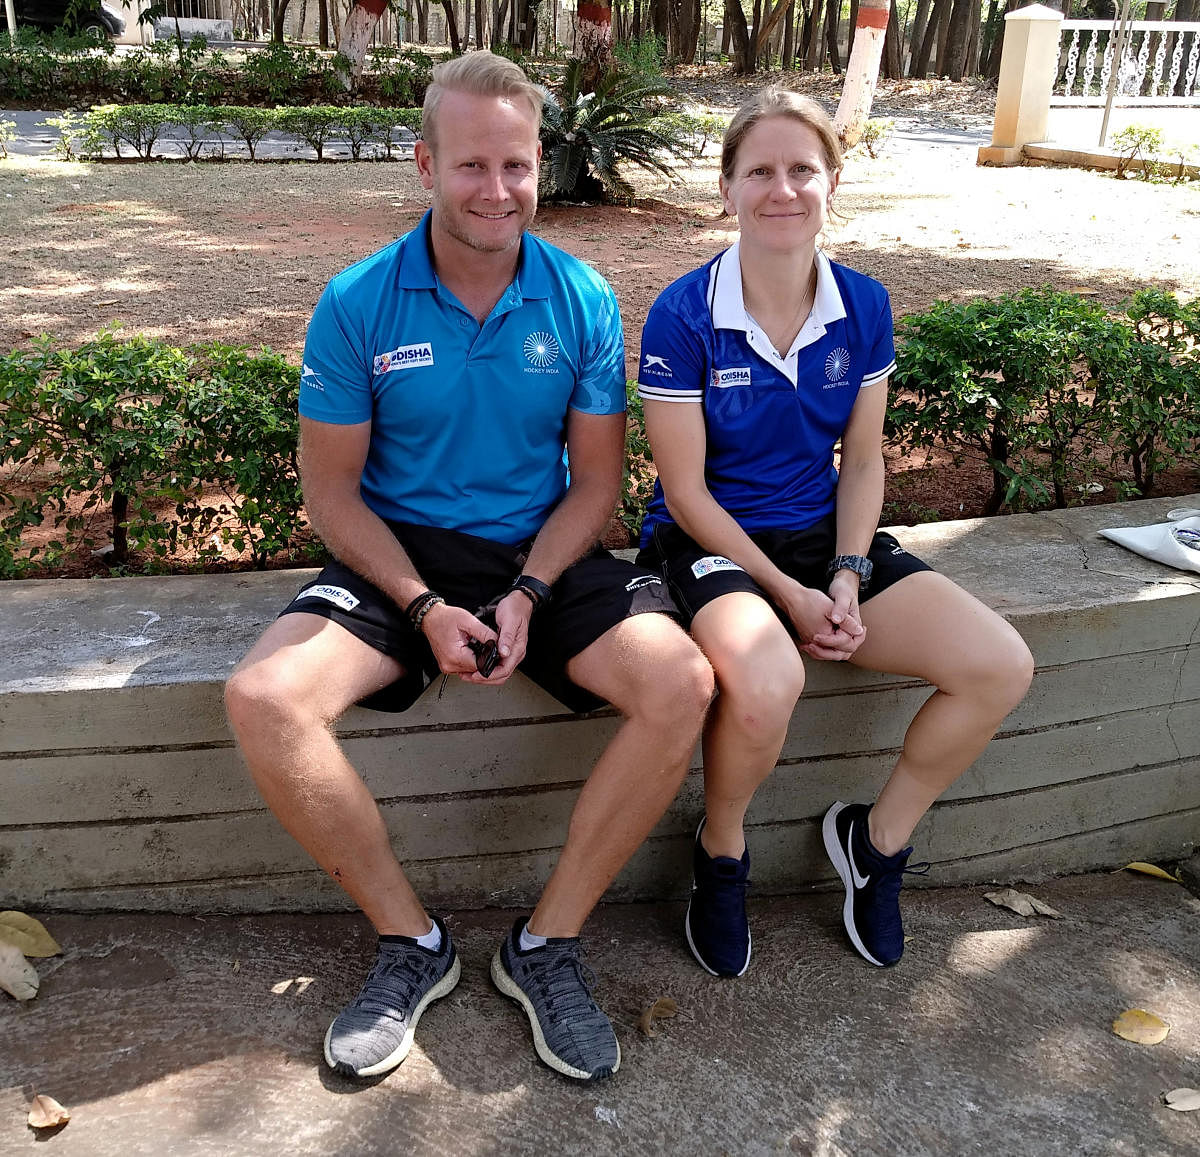 Indian women's hockey head coach Sjoerd Marijne (left) with the newly appointed analytical coach Janneke Schopman at the SAI campus in Bengaluru on Tuesday. DH PHOTO/VIVEK MV 